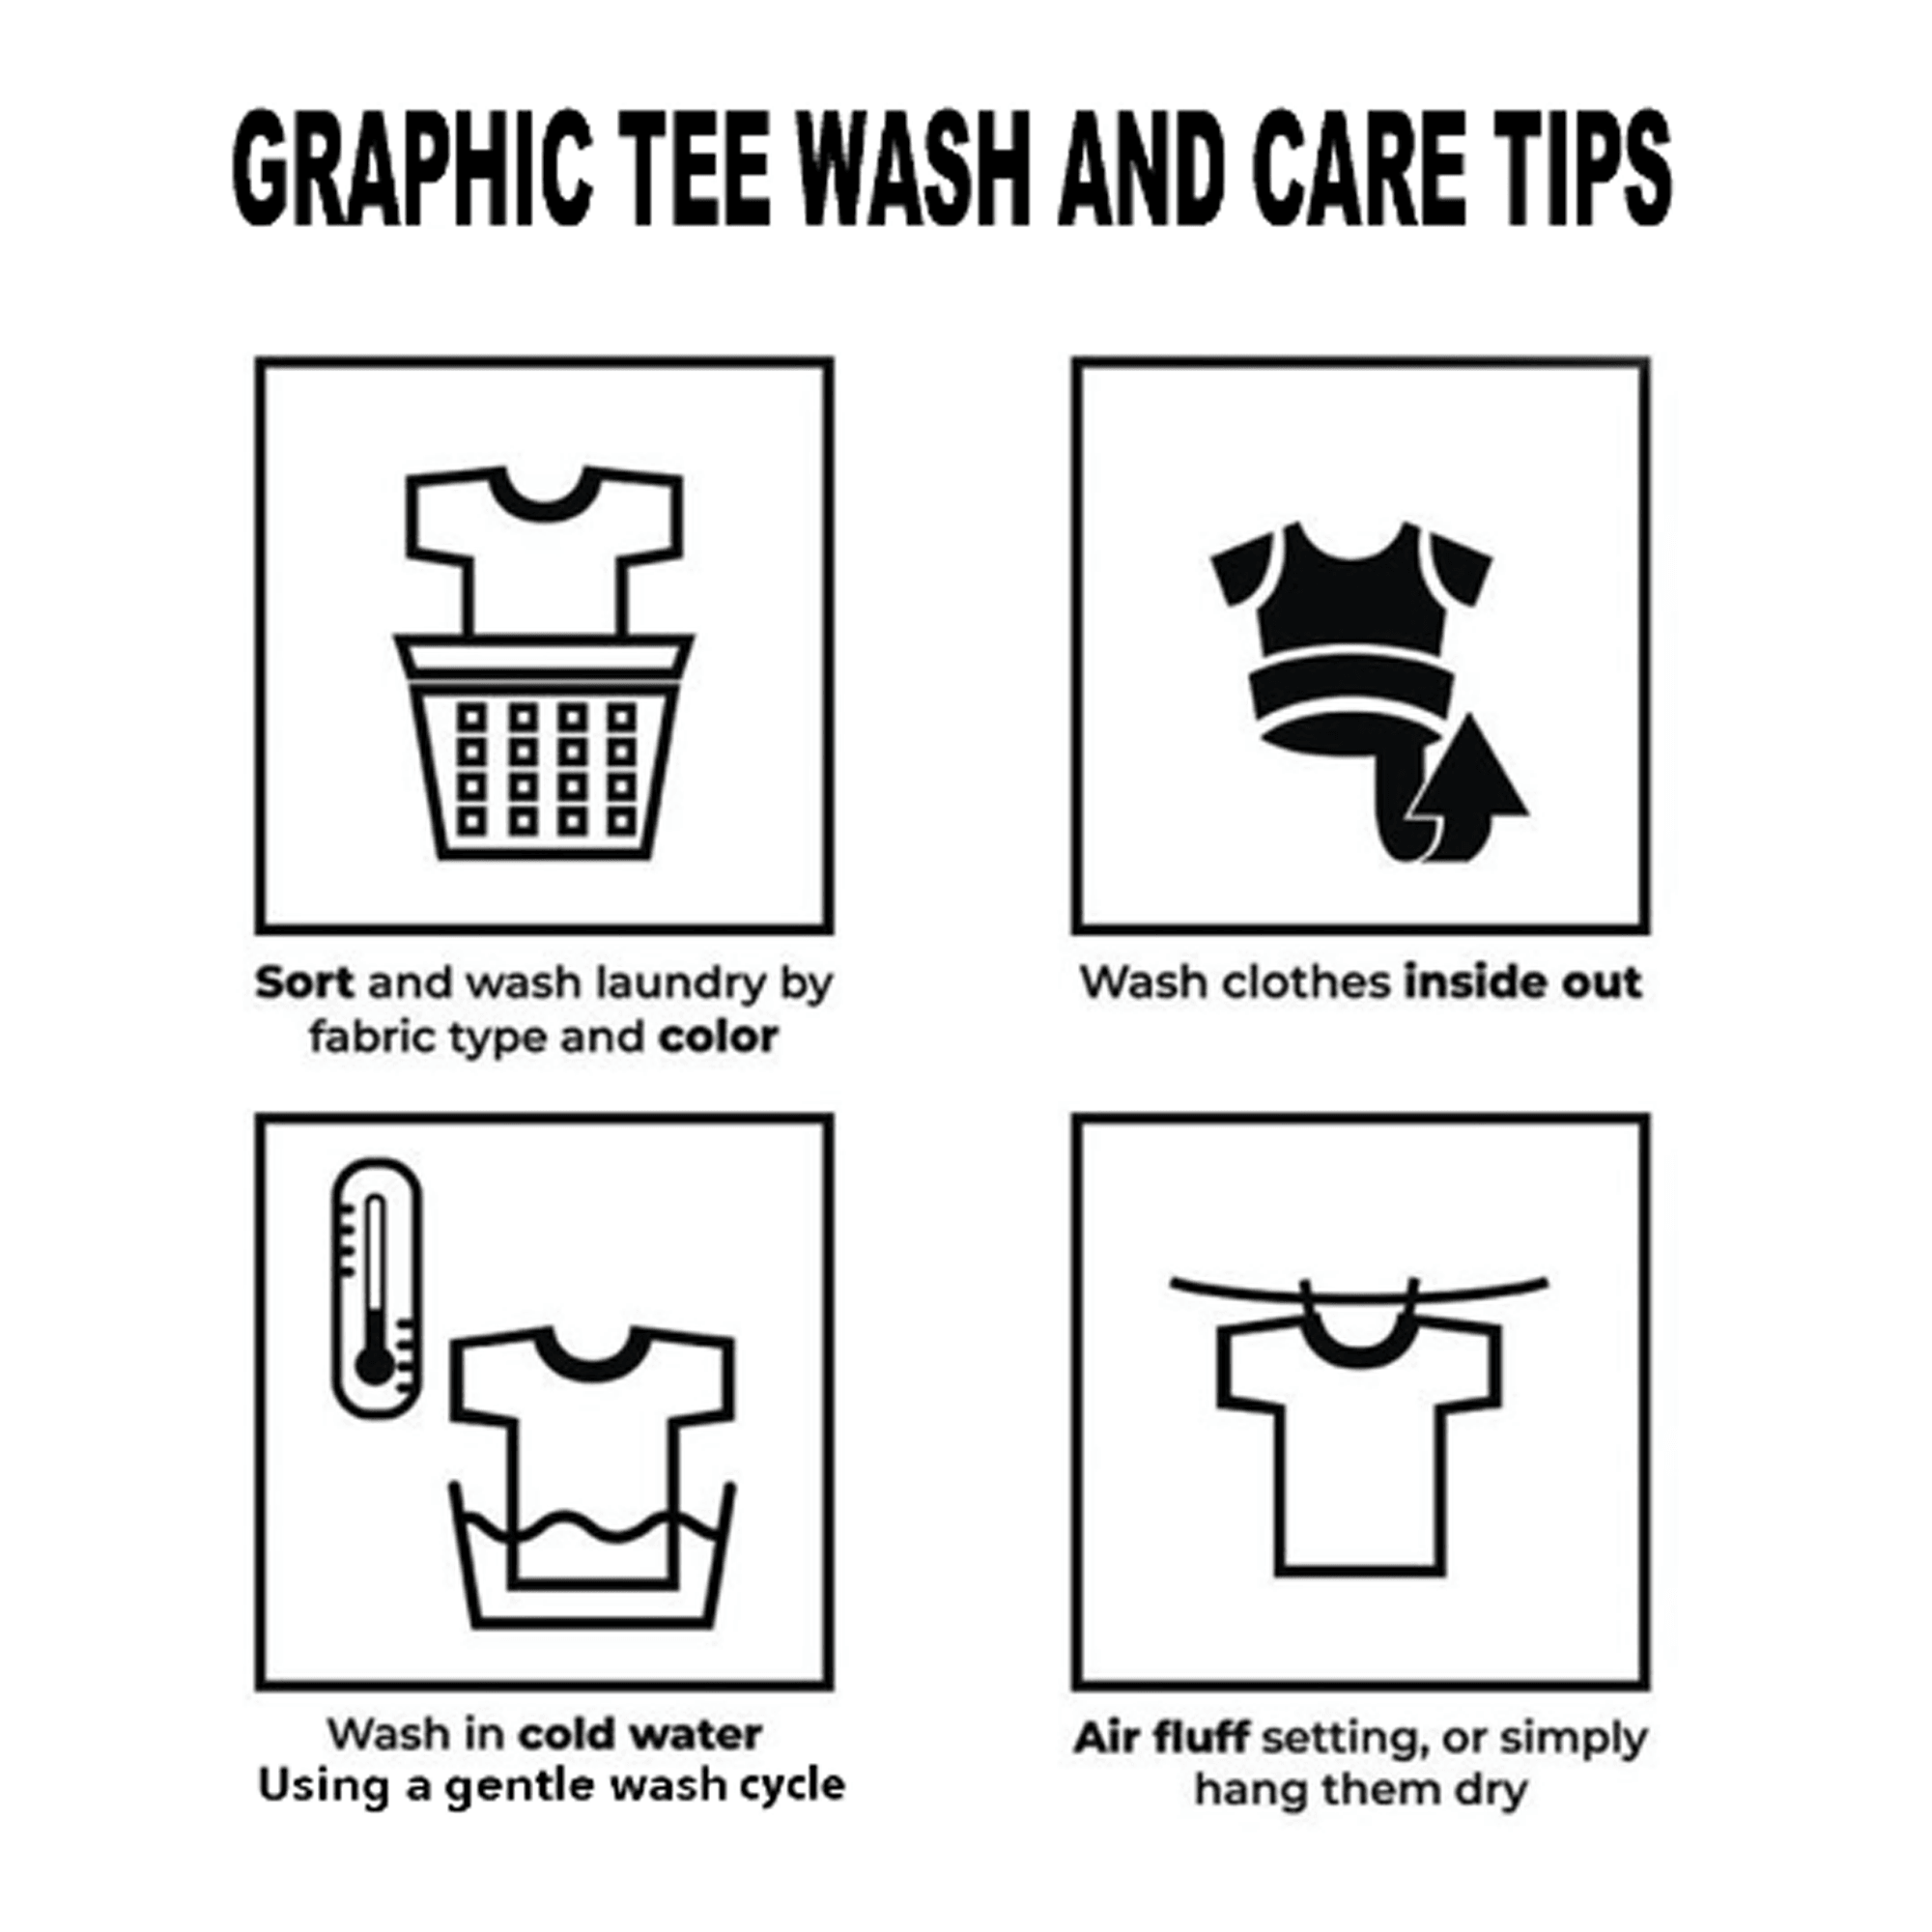 Stay True Shirt care tips photo